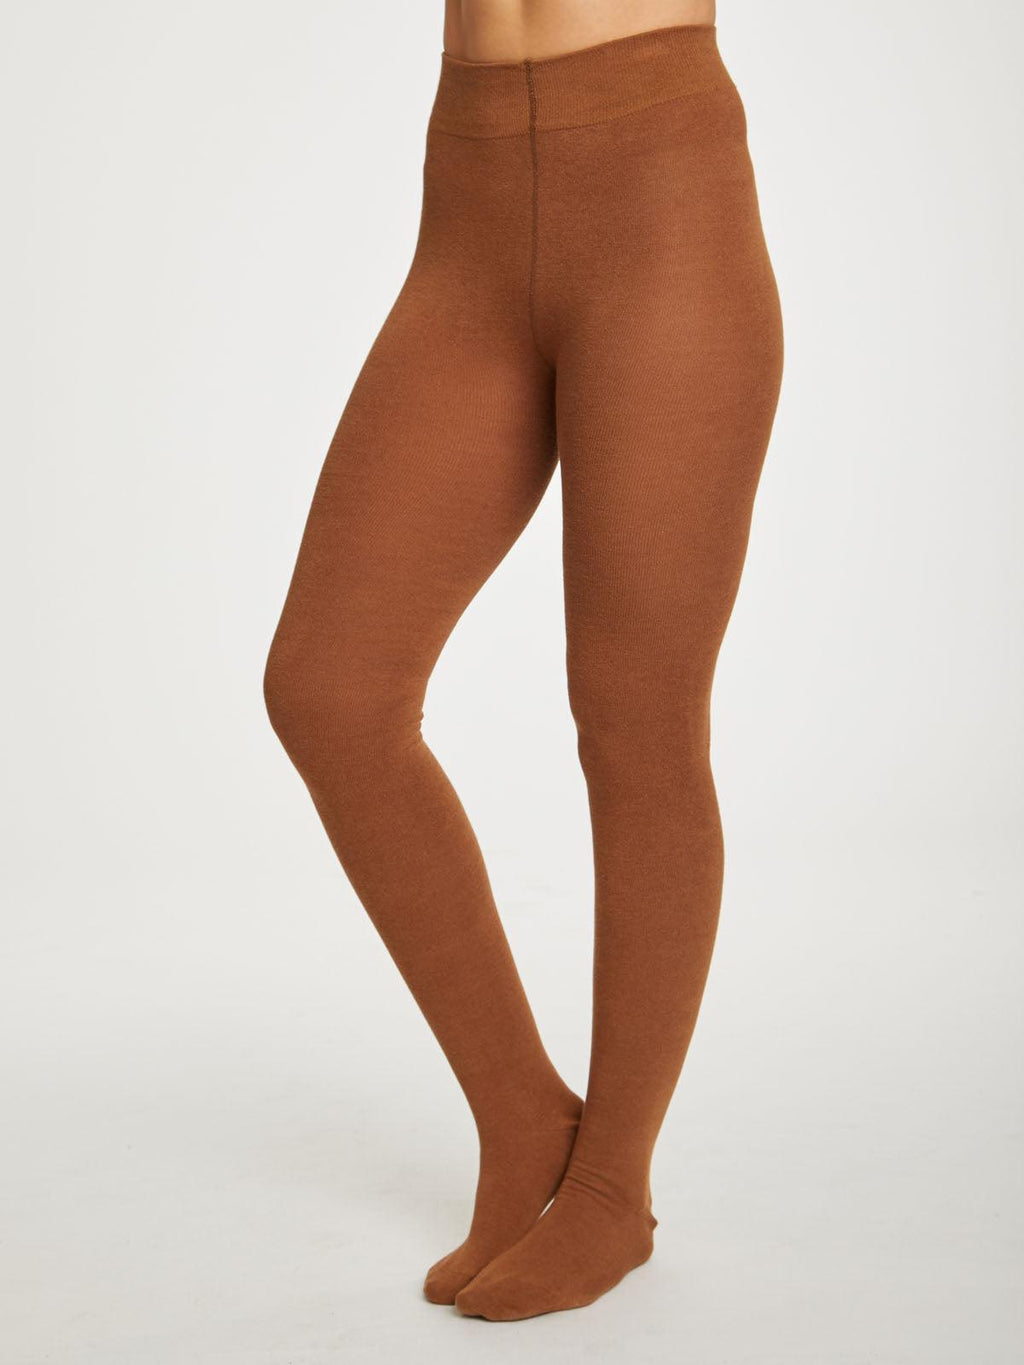 Bamboo Essential Plain Tights in Toffee Brown